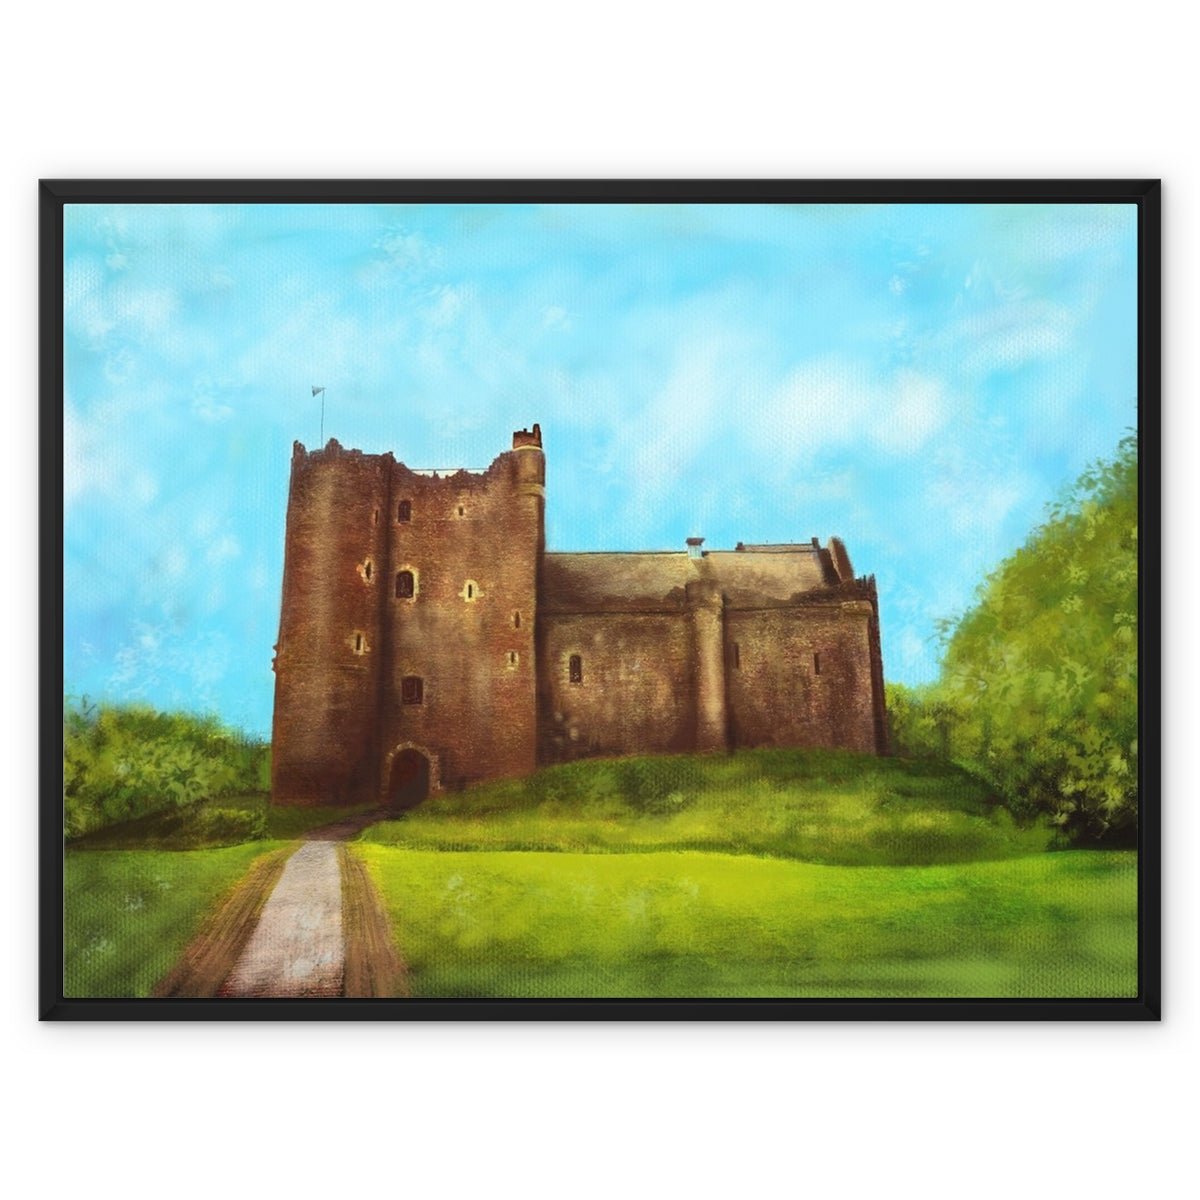 Doune Castle Painting | Framed Canvas From Scotland-Floating Framed Canvas Prints-Scottish Castles Art Gallery-32"x24"-Black Frame-Paintings, Prints, Homeware, Art Gifts From Scotland By Scottish Artist Kevin Hunter